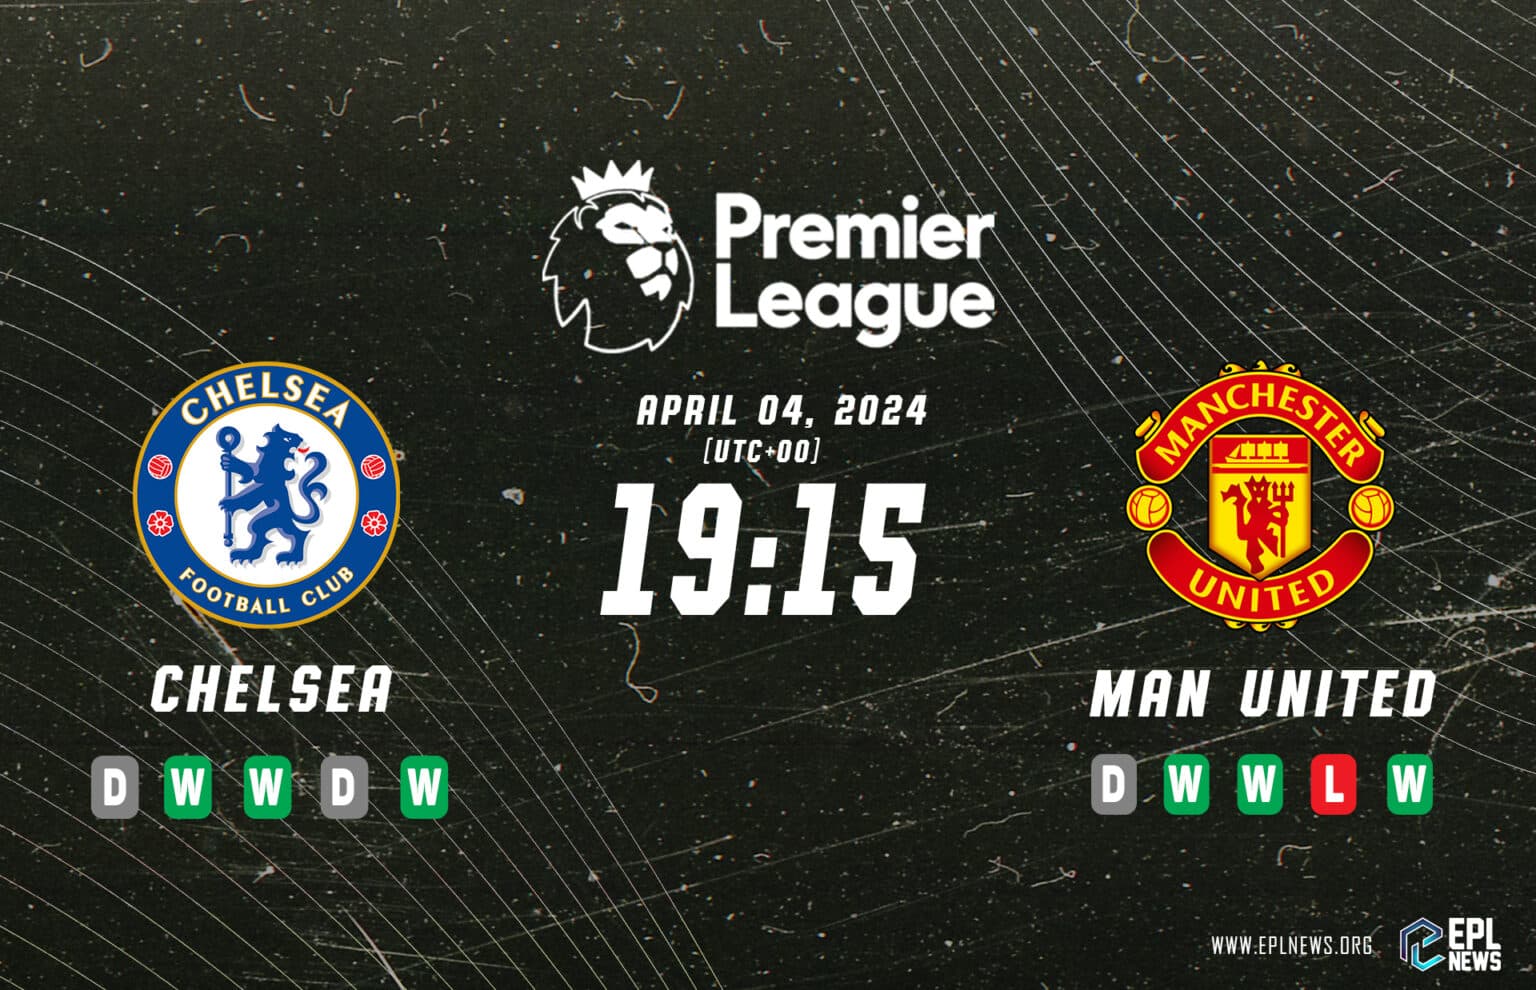 Chelsea vs Manchester United Preview- Inconsistent Giants Meet at Stamford Bridge